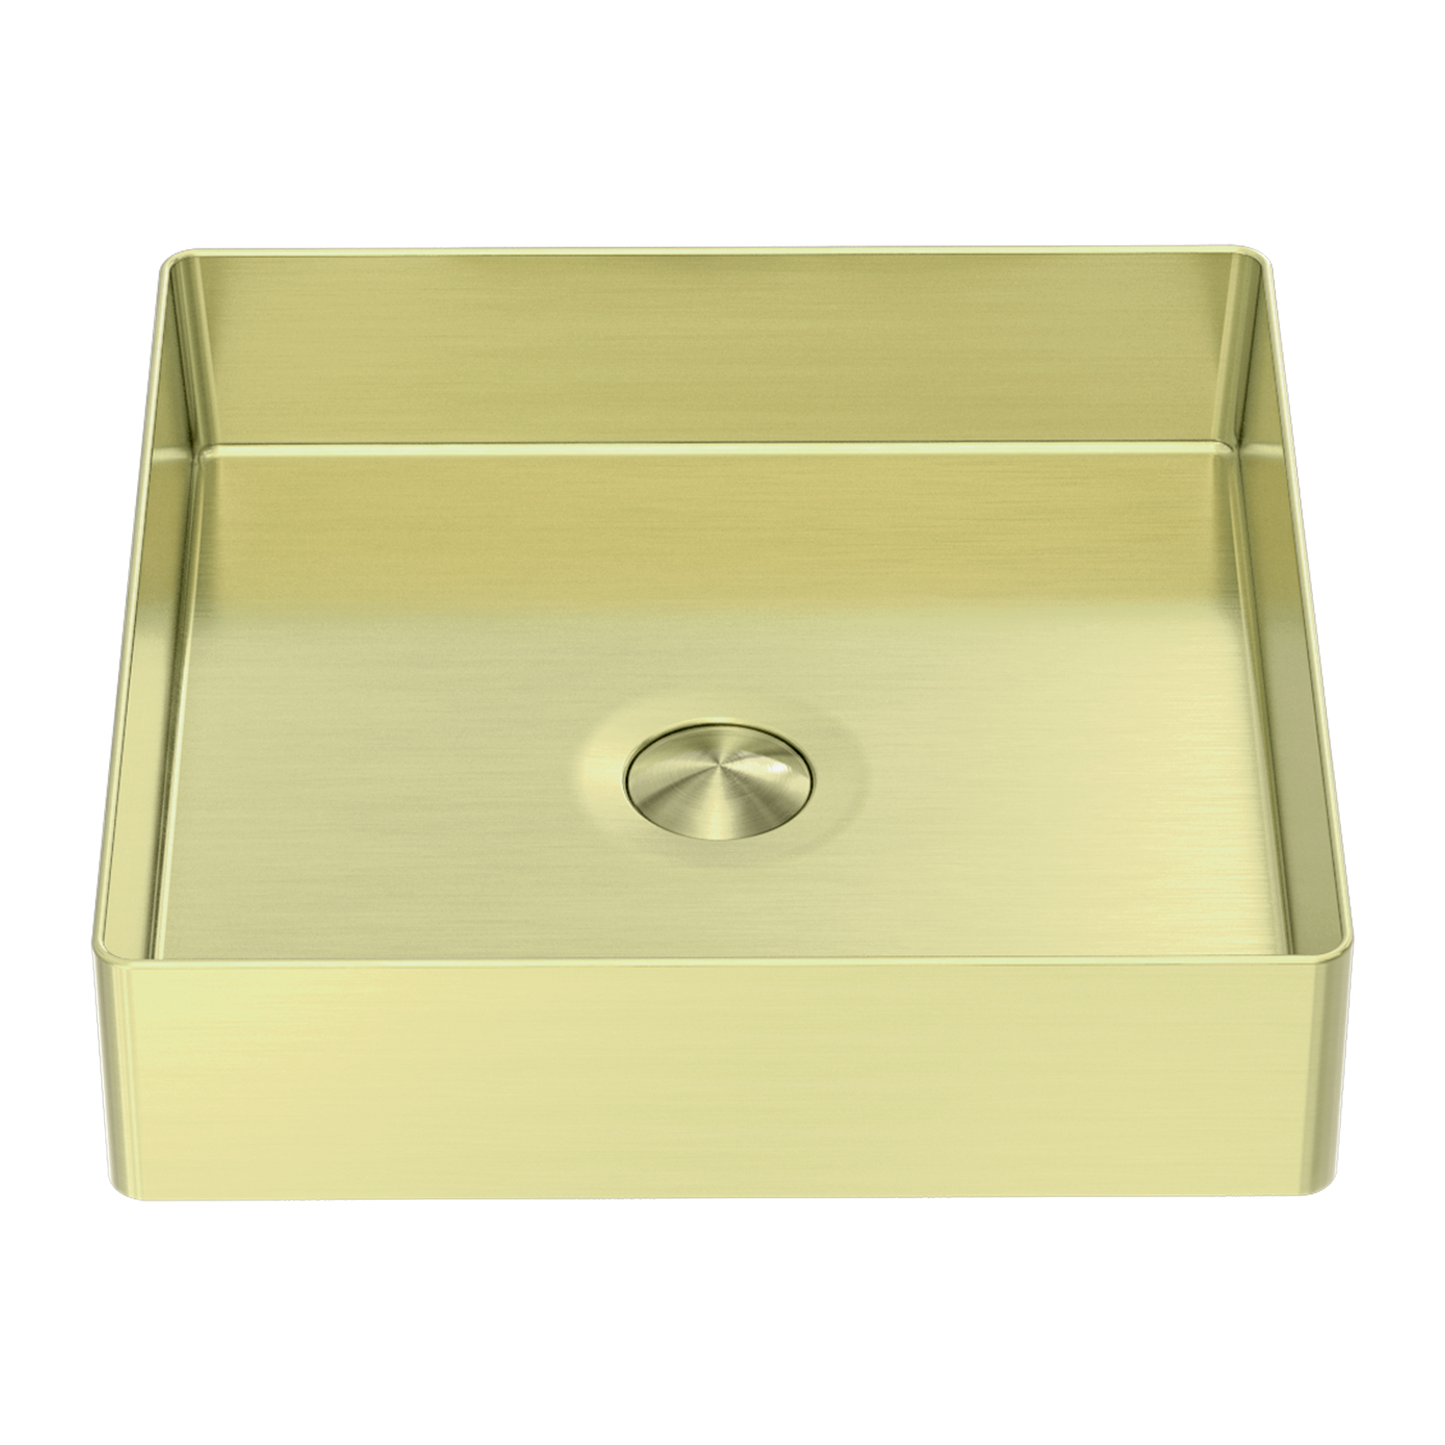 Stainless Steel Square Counter Top Basin - Brushed Gold with PVD Coating